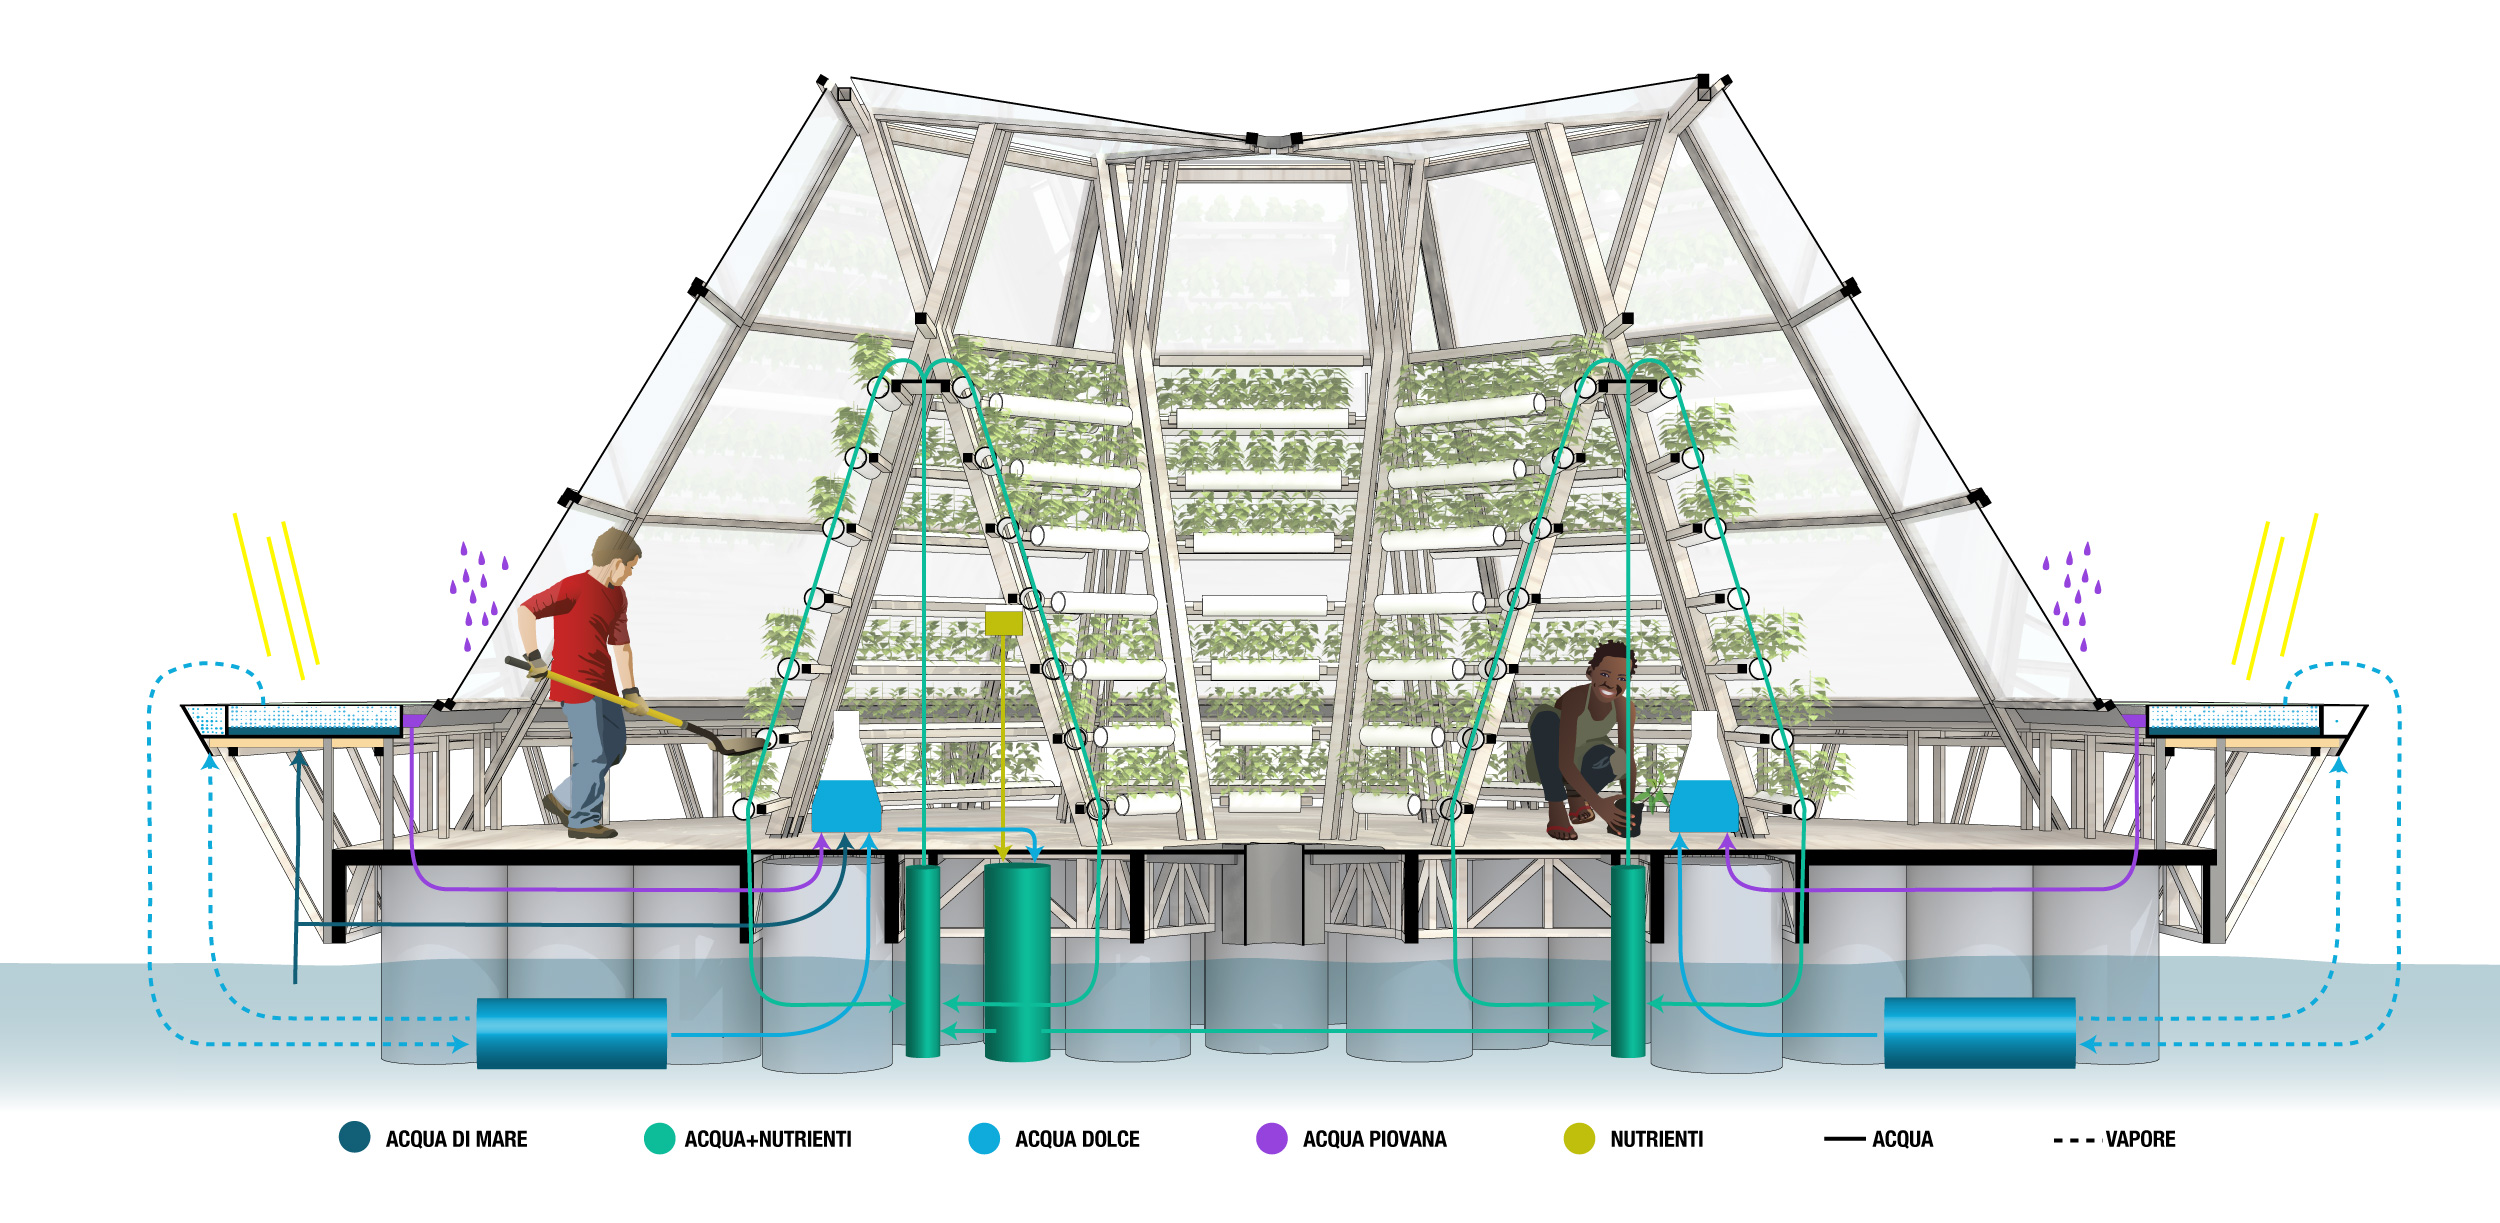 Jellyfish Barge: detail section of the floating agricultural greenhouse